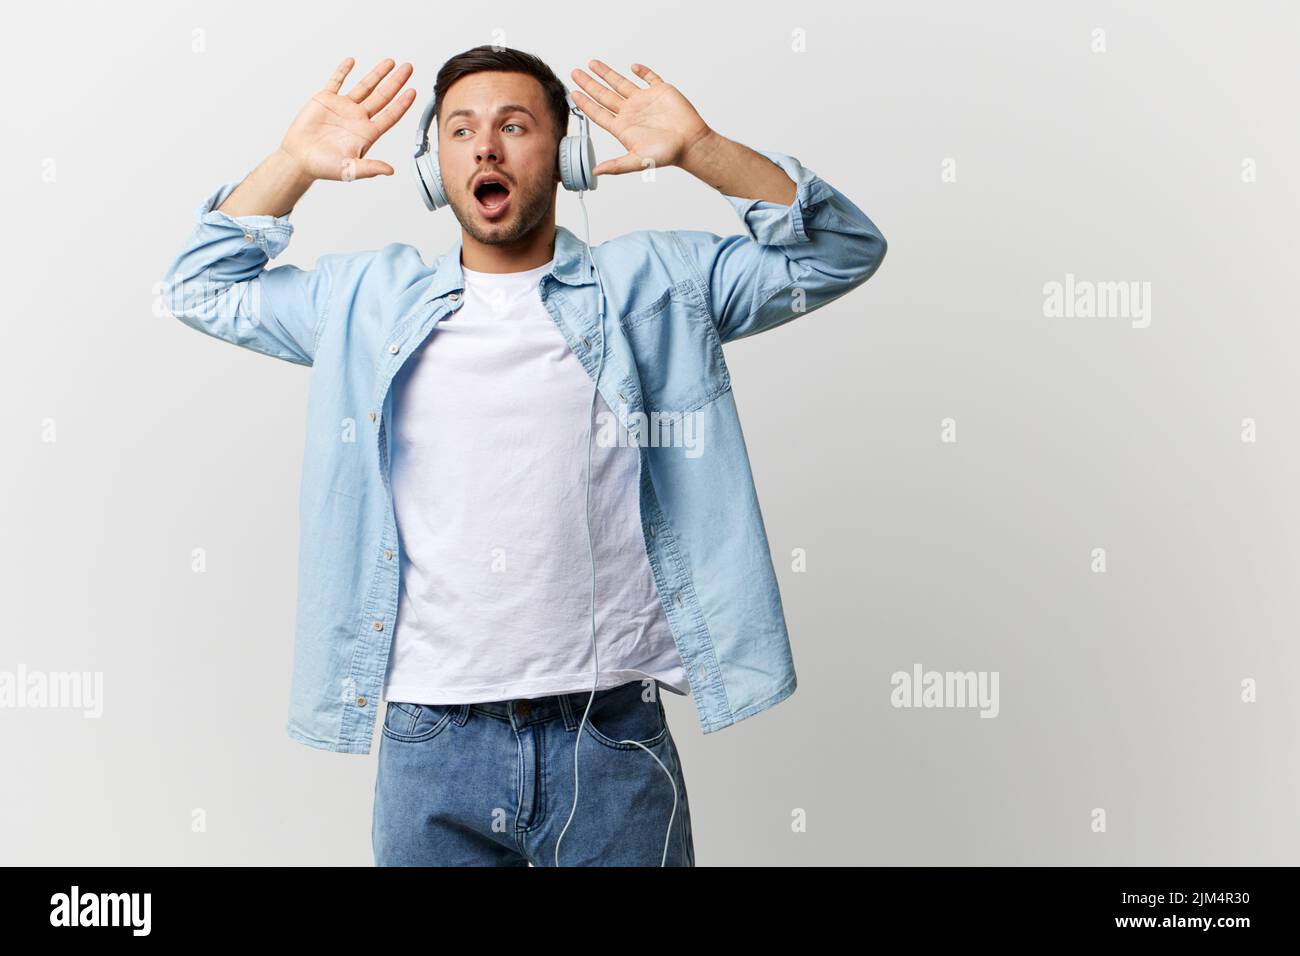 Excited shocked happy tanned handsome man in casual basic t-shirt headphones hold palms up listen cool music posing isolated on over white studio Stock Photo